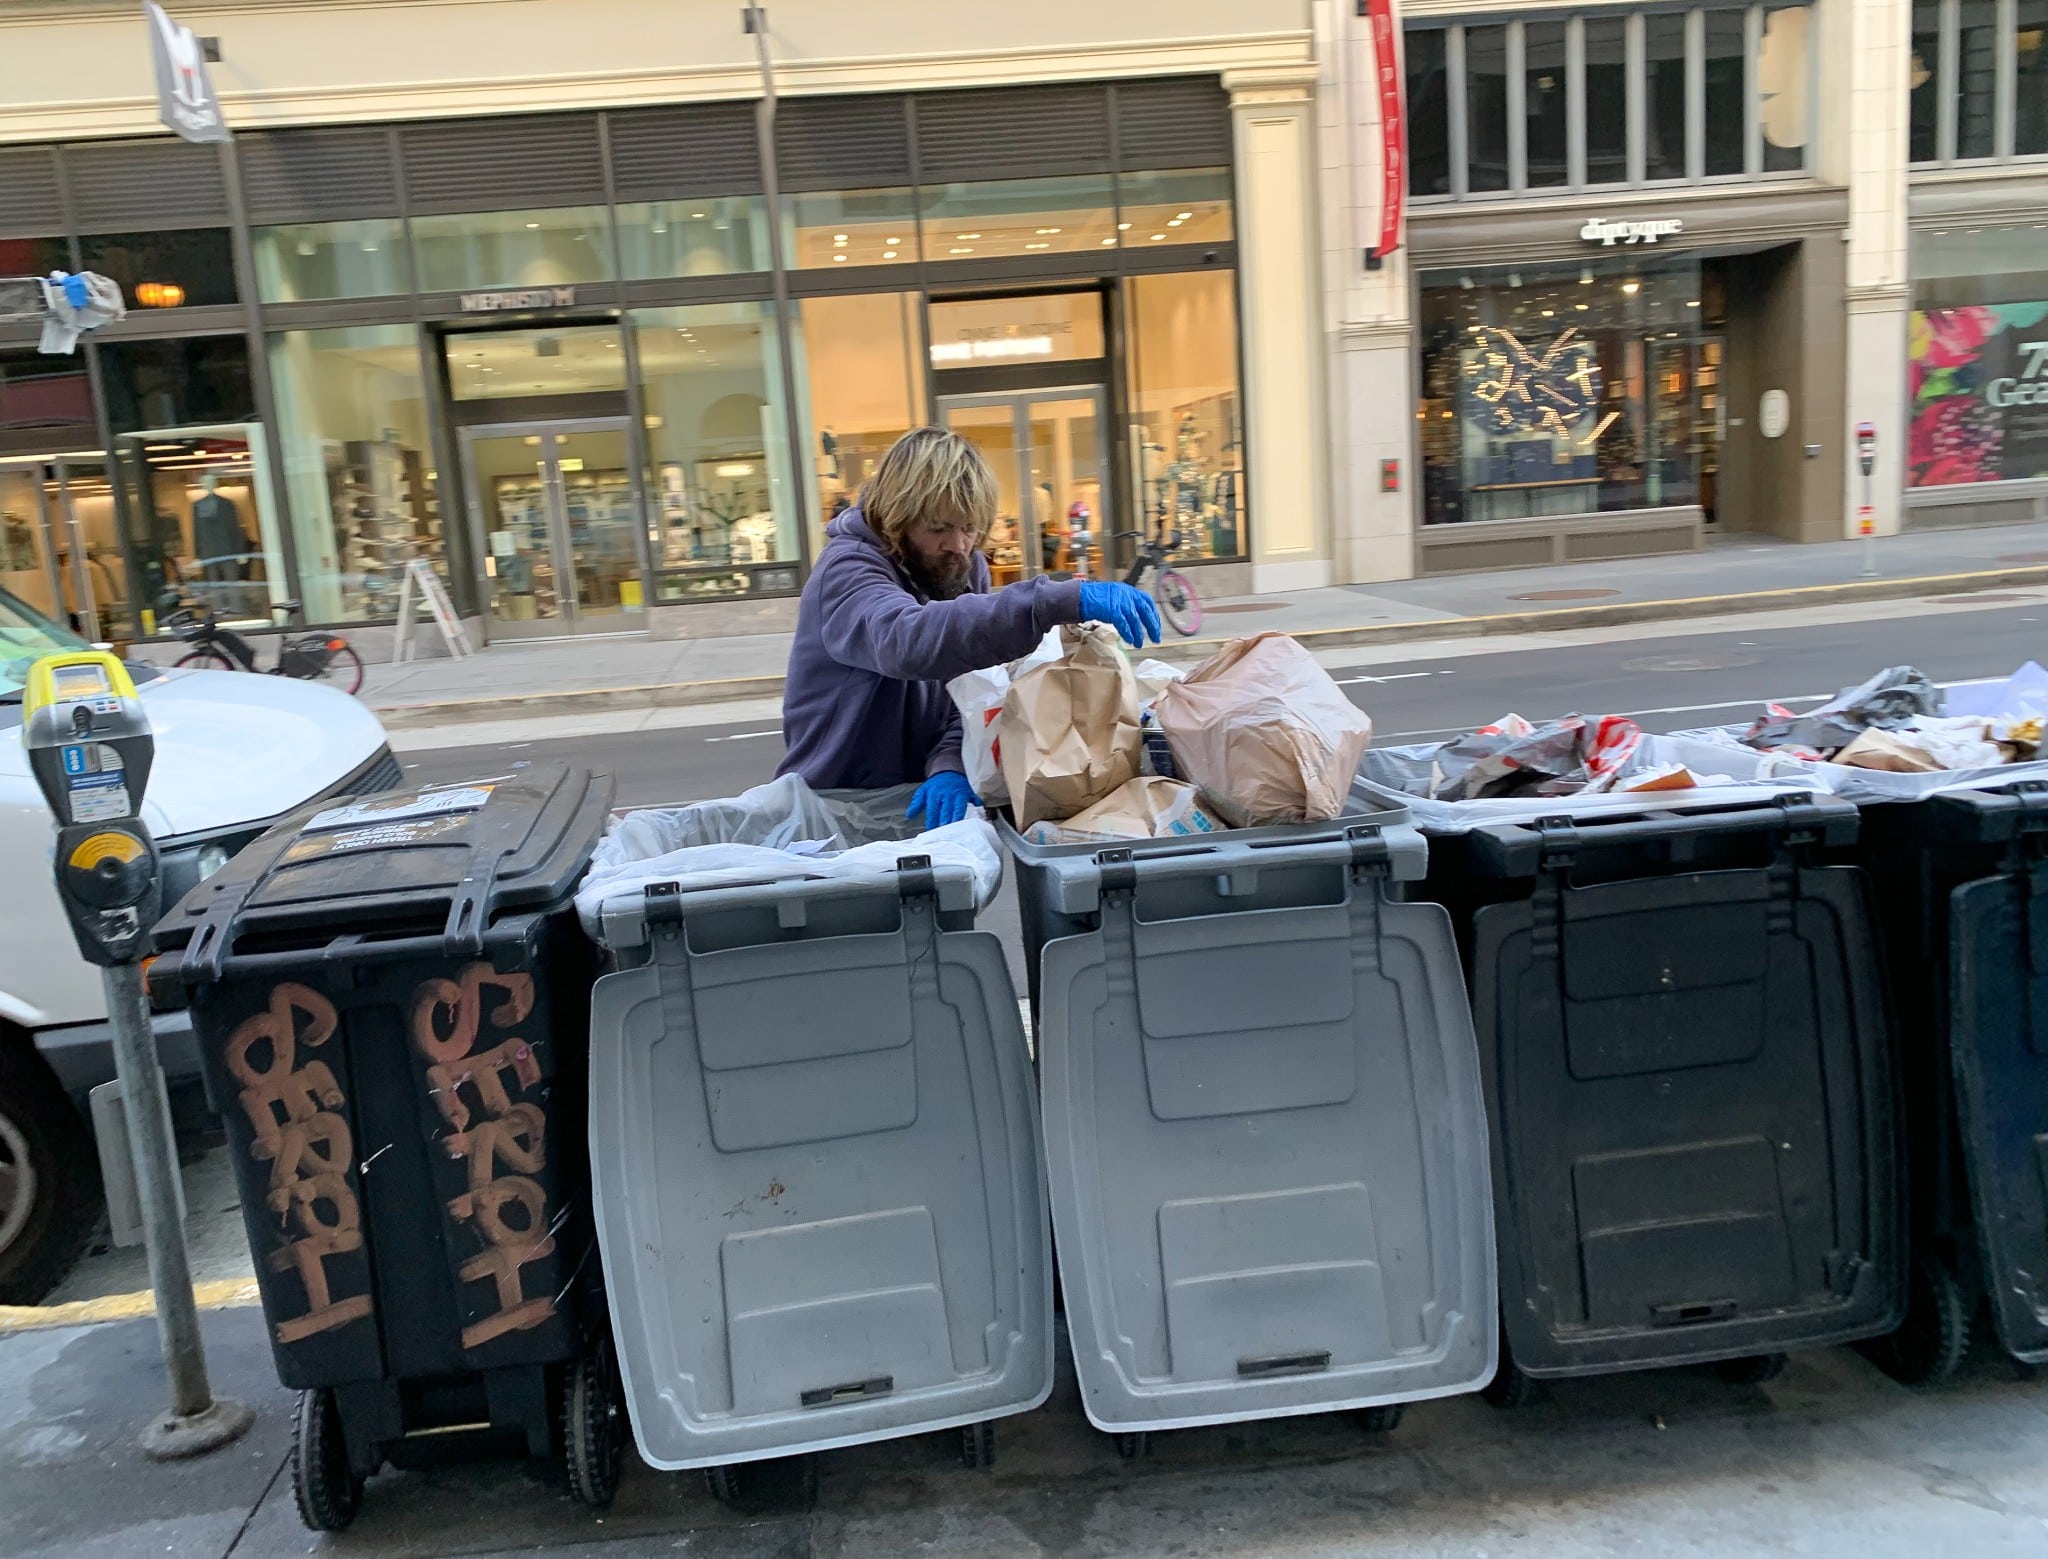 A homeless man searches through garbage in San Francisco, California (The American Spectator)